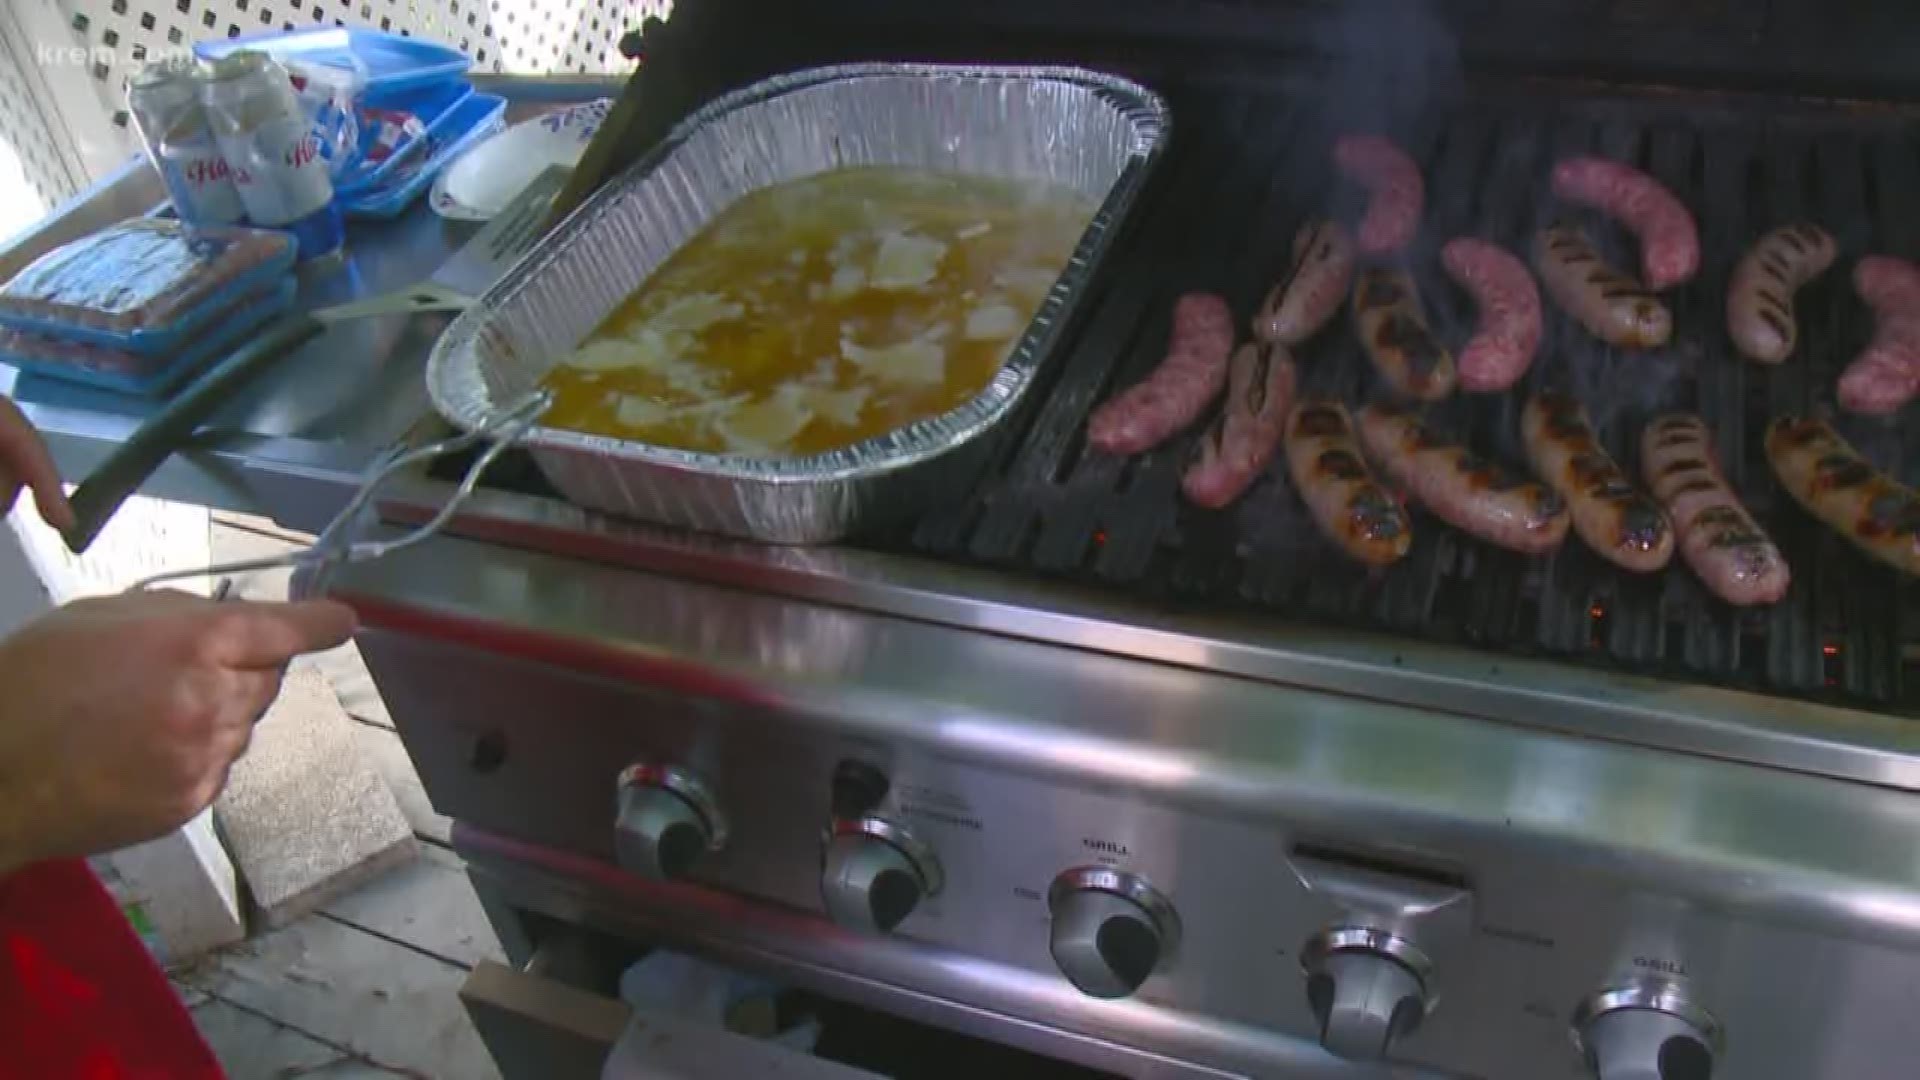 Tom Sherry is getting us ready for the weekend with his beer brat recipe.